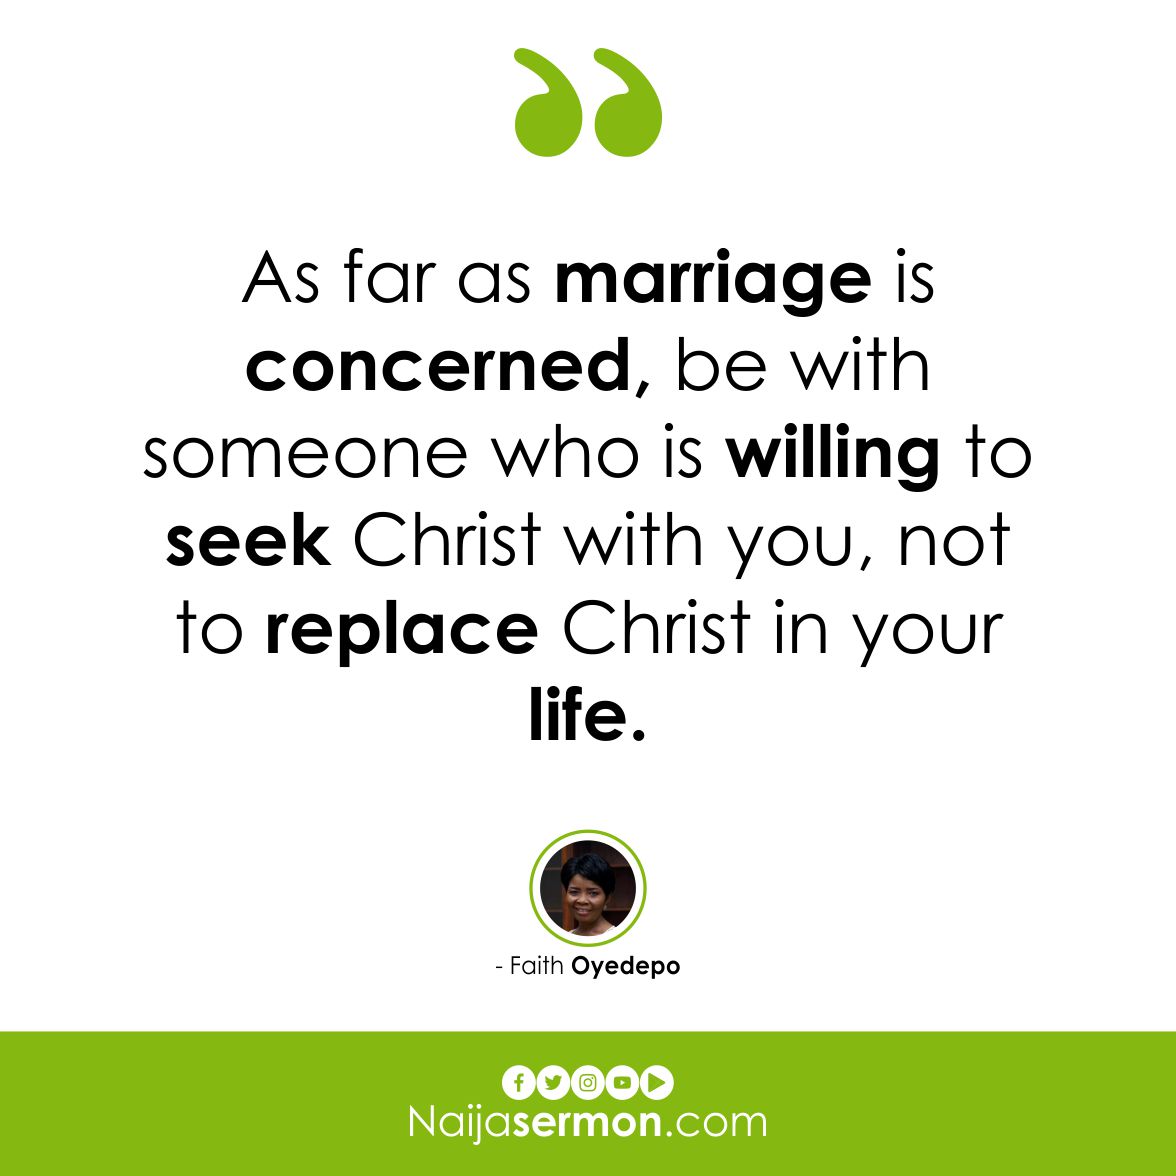 Quote of the Day by Faith Oyedepo 20